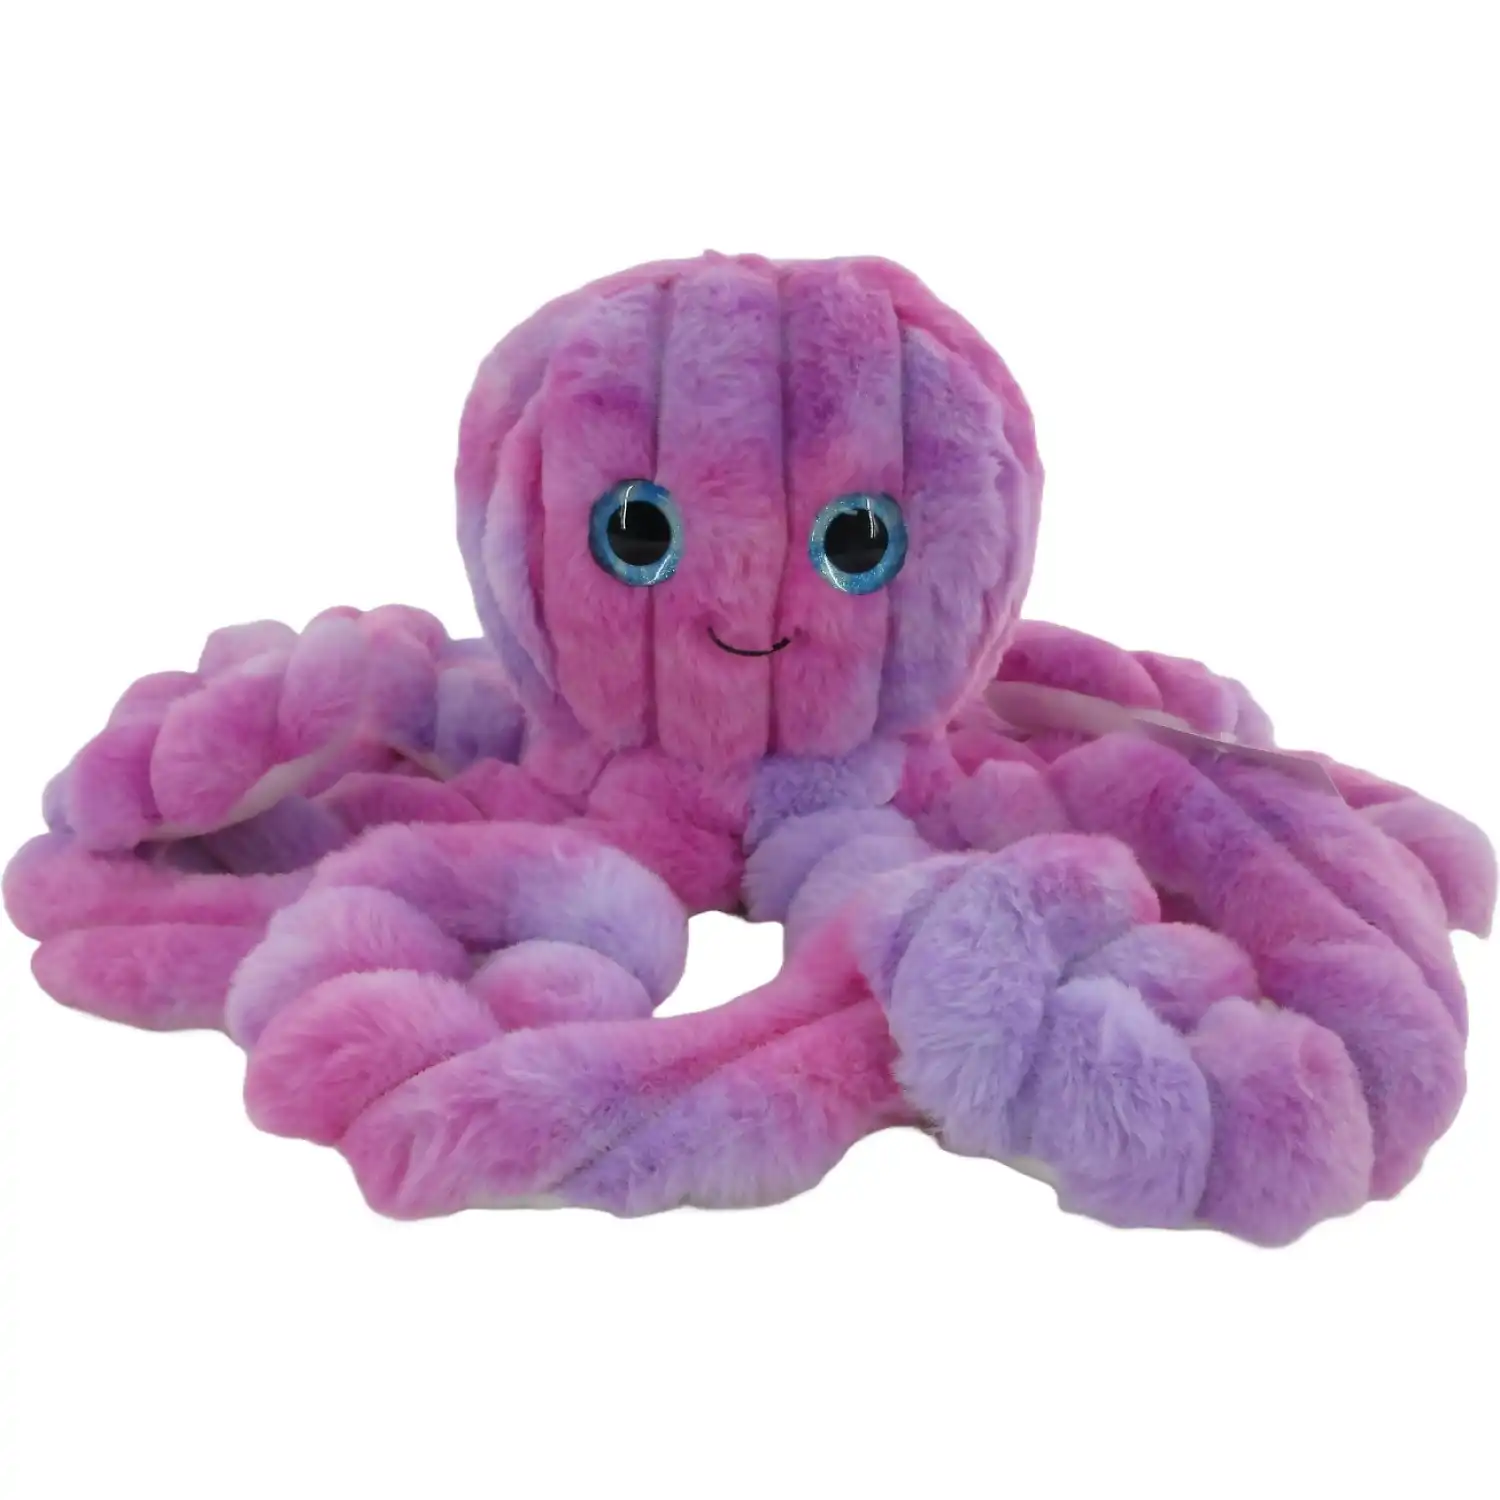 Cotton Candy - 50cm Tie-dyed Oswald Plush Octopus - Hot Pink/Violet